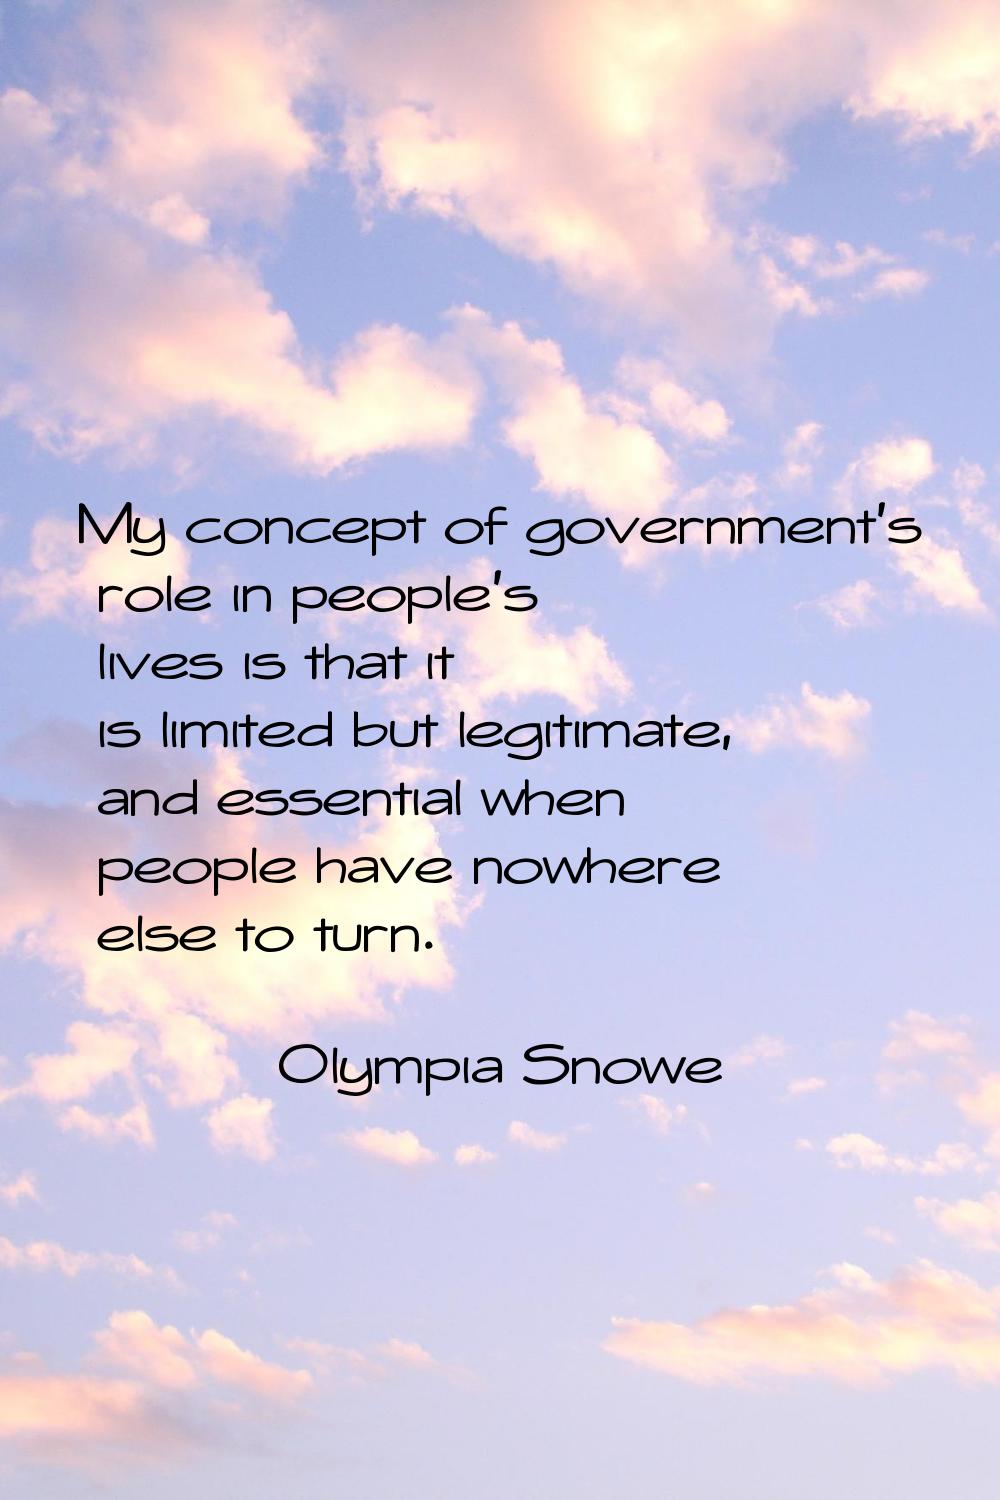 My concept of government's role in people's lives is that it is limited but legitimate, and essenti